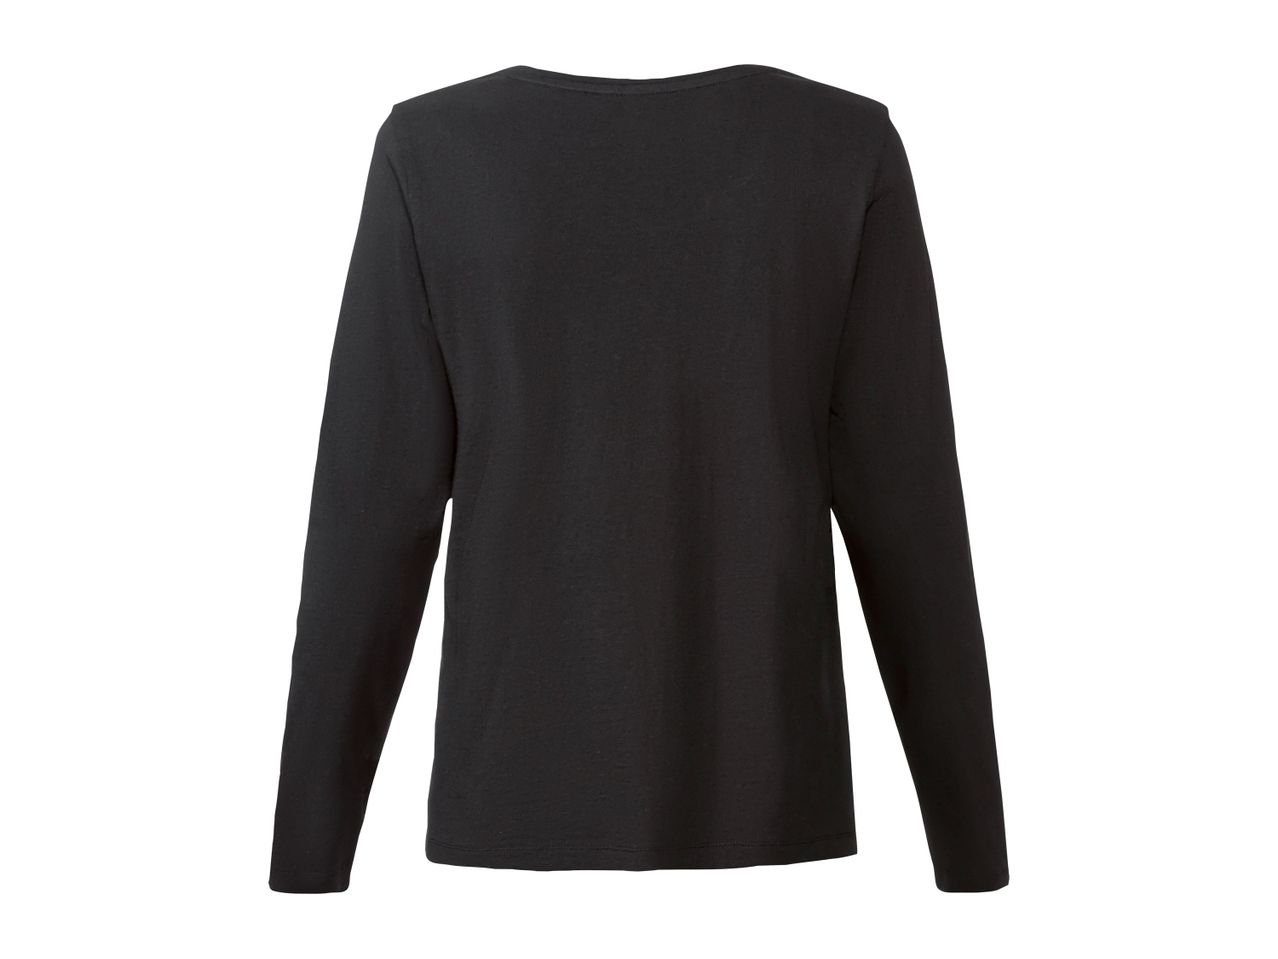 Go to full screen view: Ladies’ Long Sleeve Top - Image 2